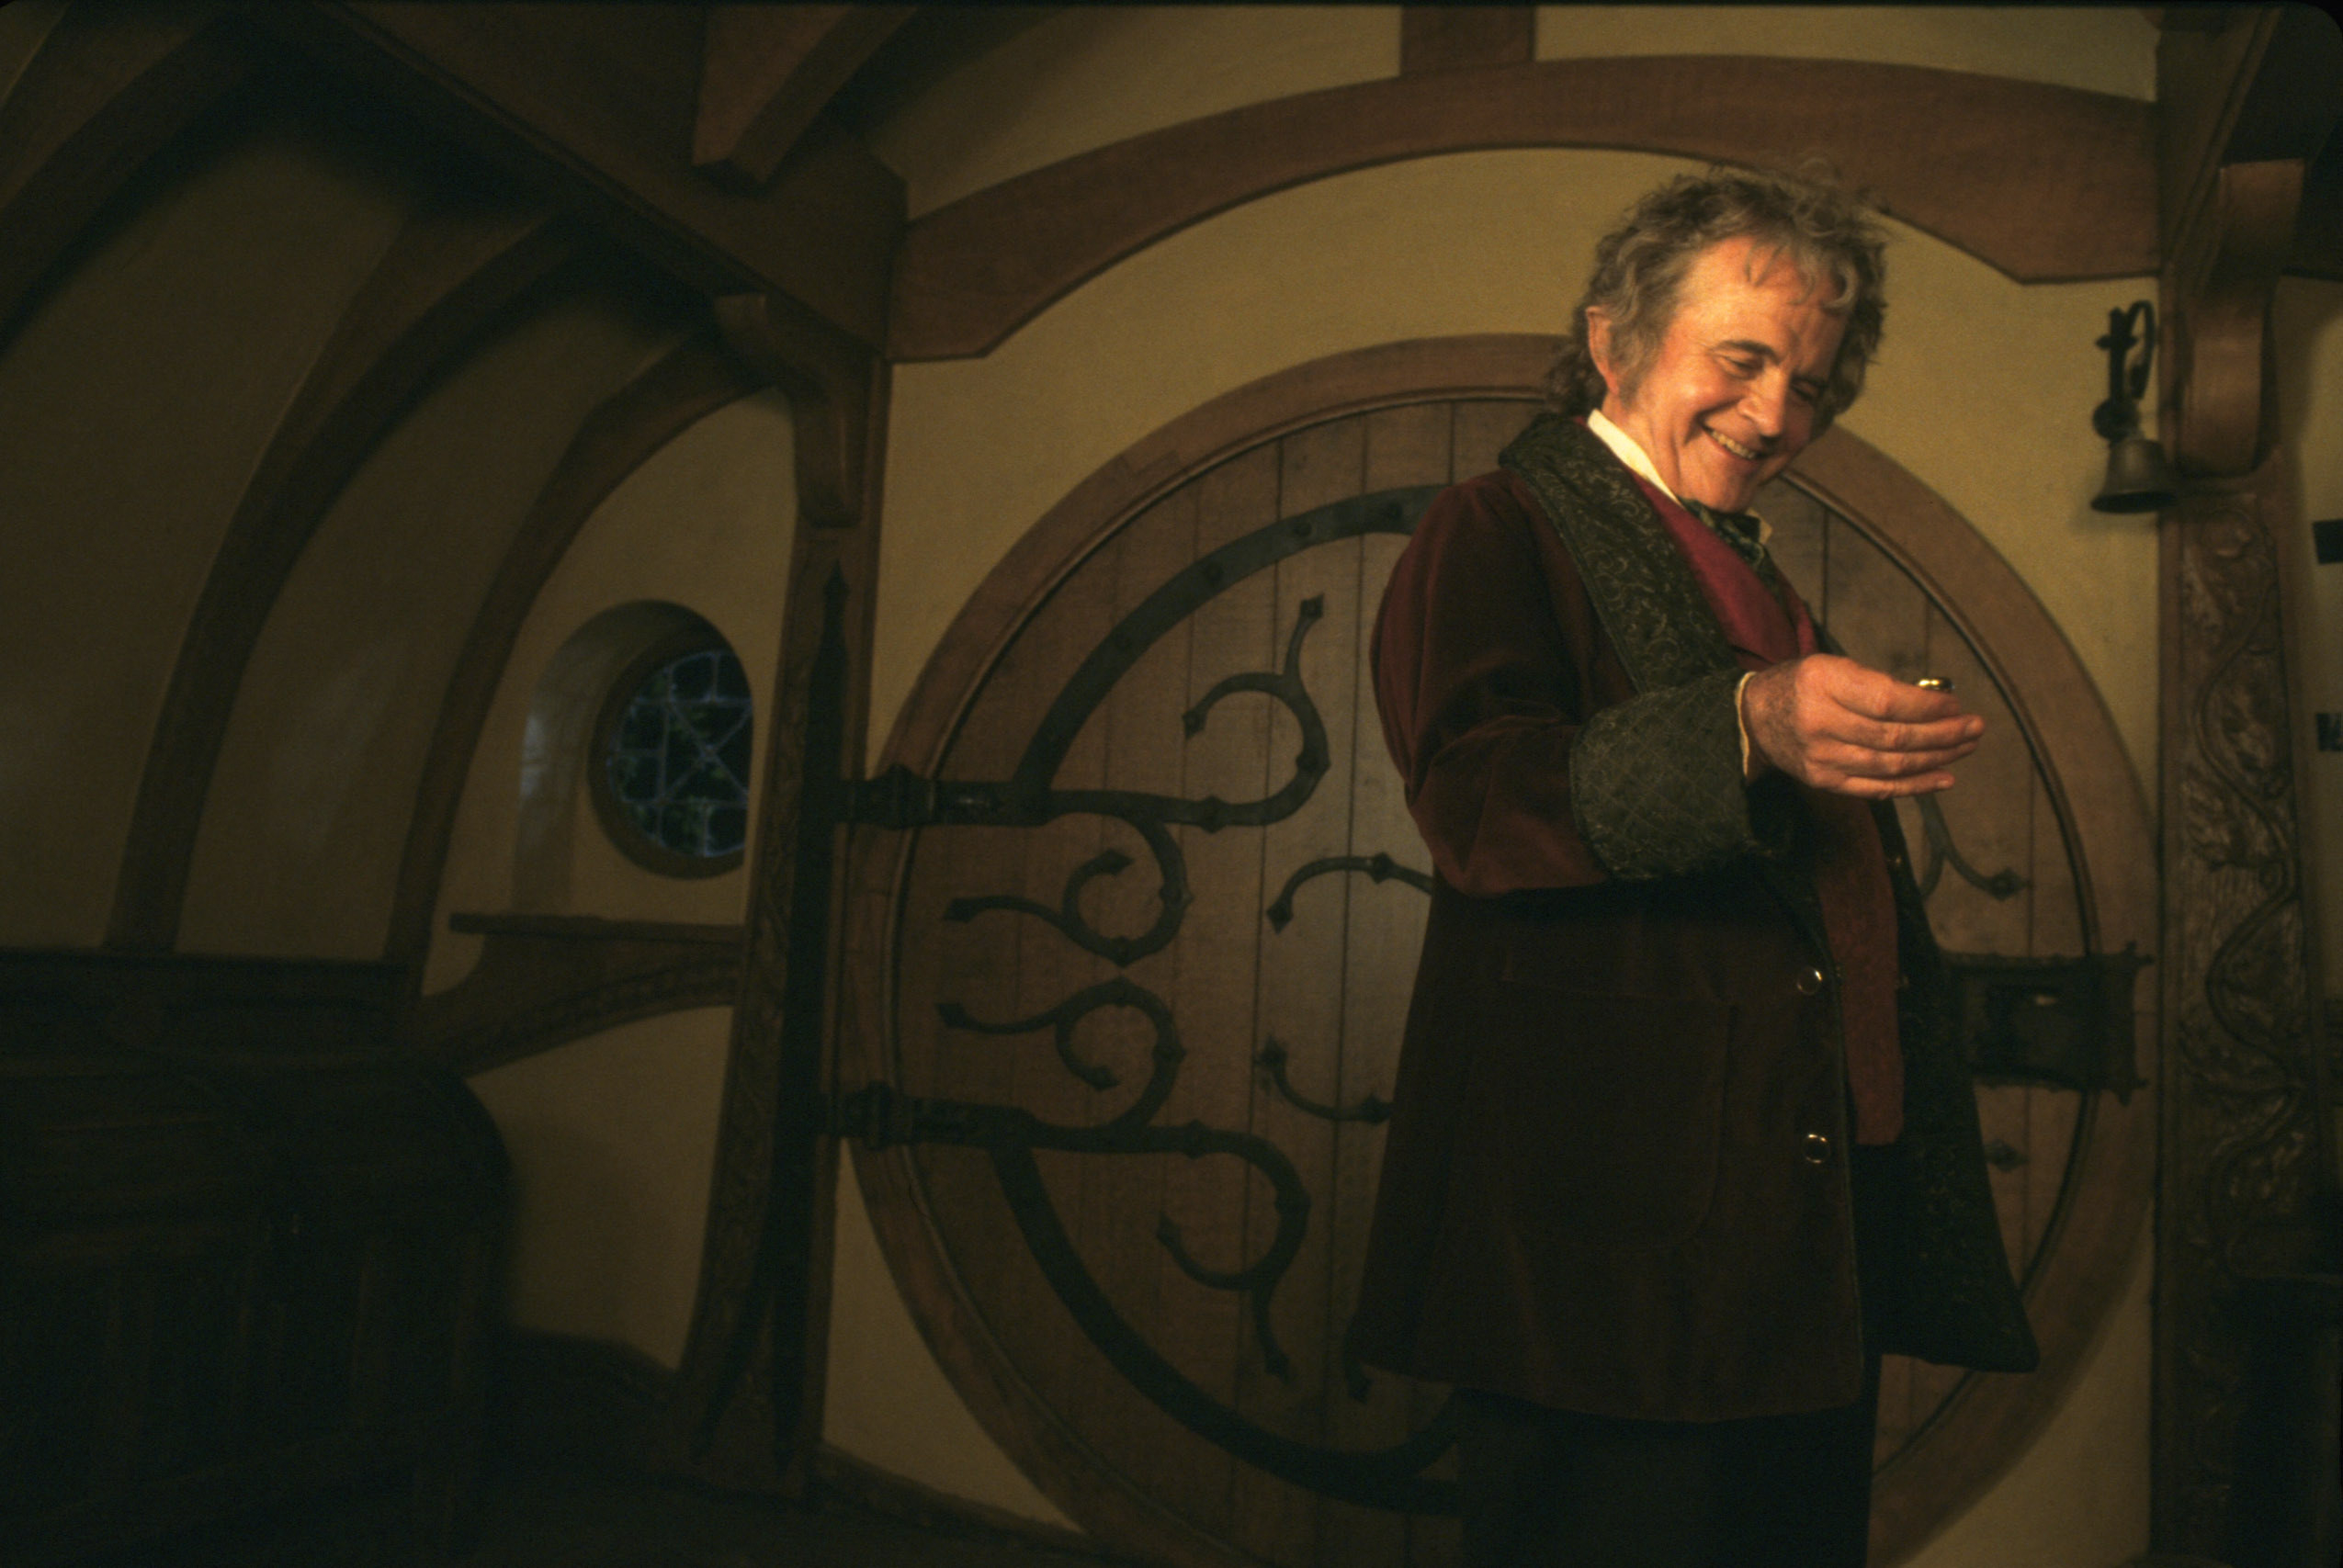 Ian Holm in The Lord of the Rings: The Fellowship of the Ring